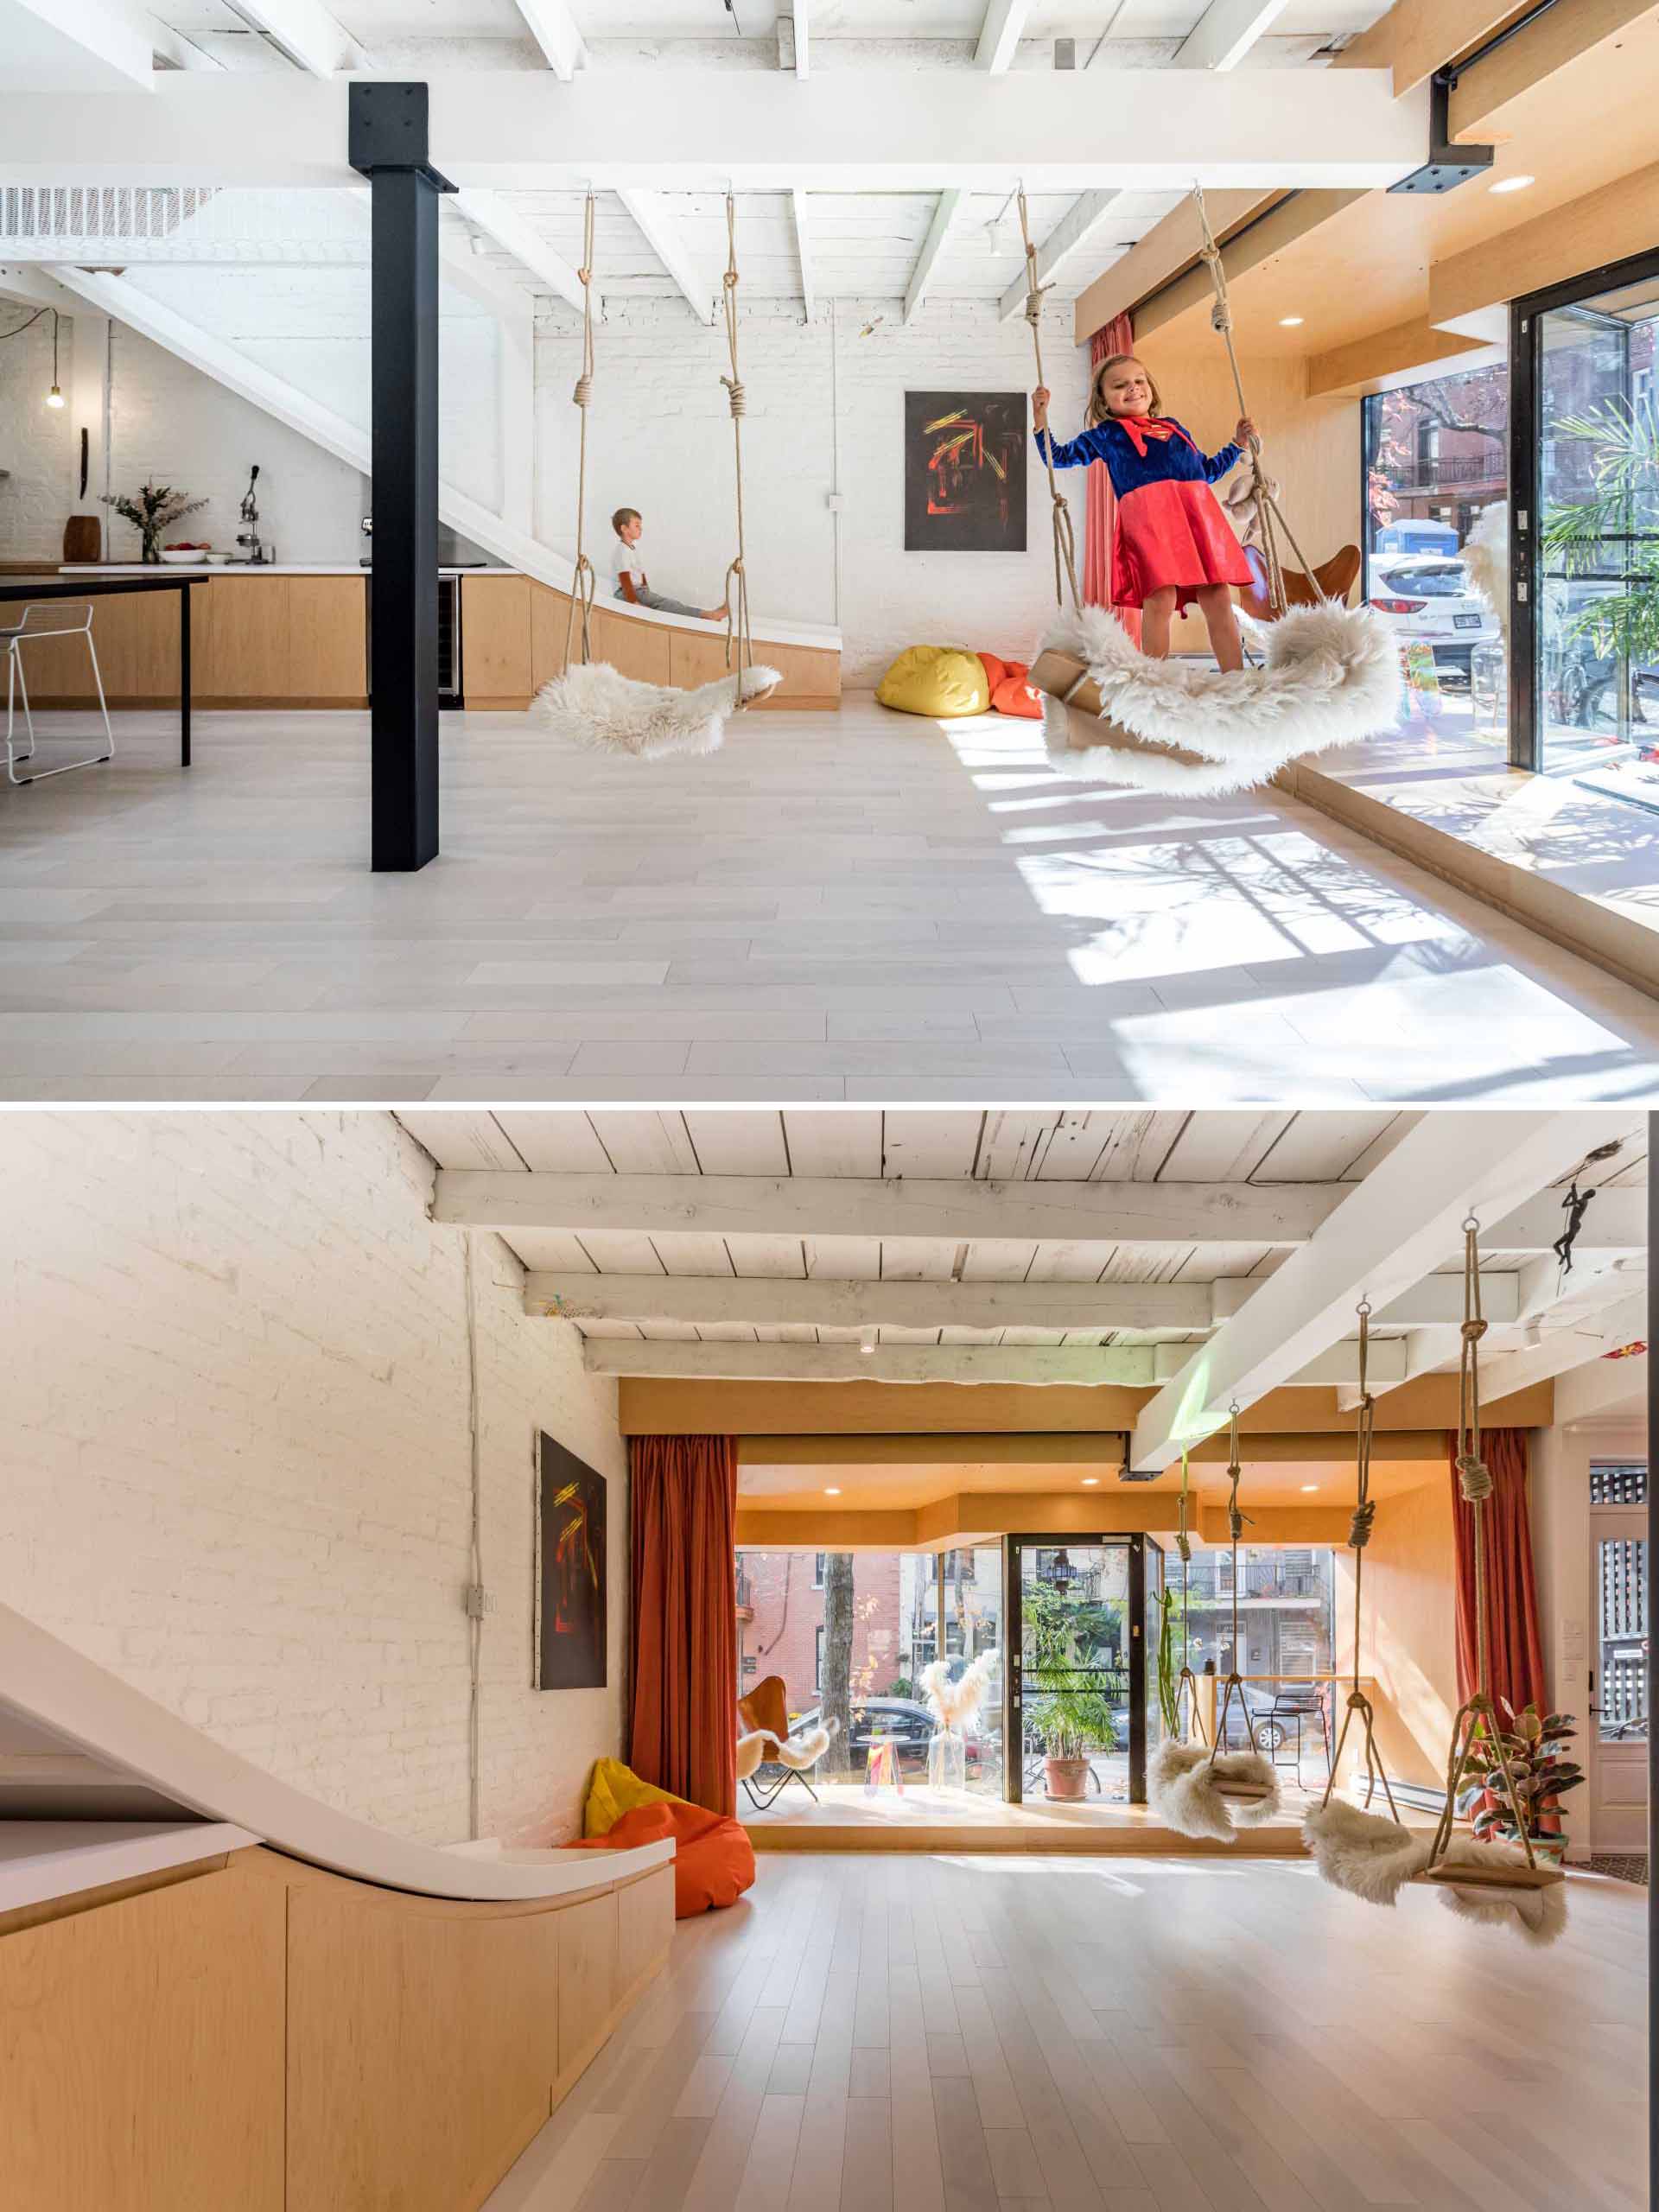 This modern interior includes a pair of swings and a slide that connects the two floors of the home.